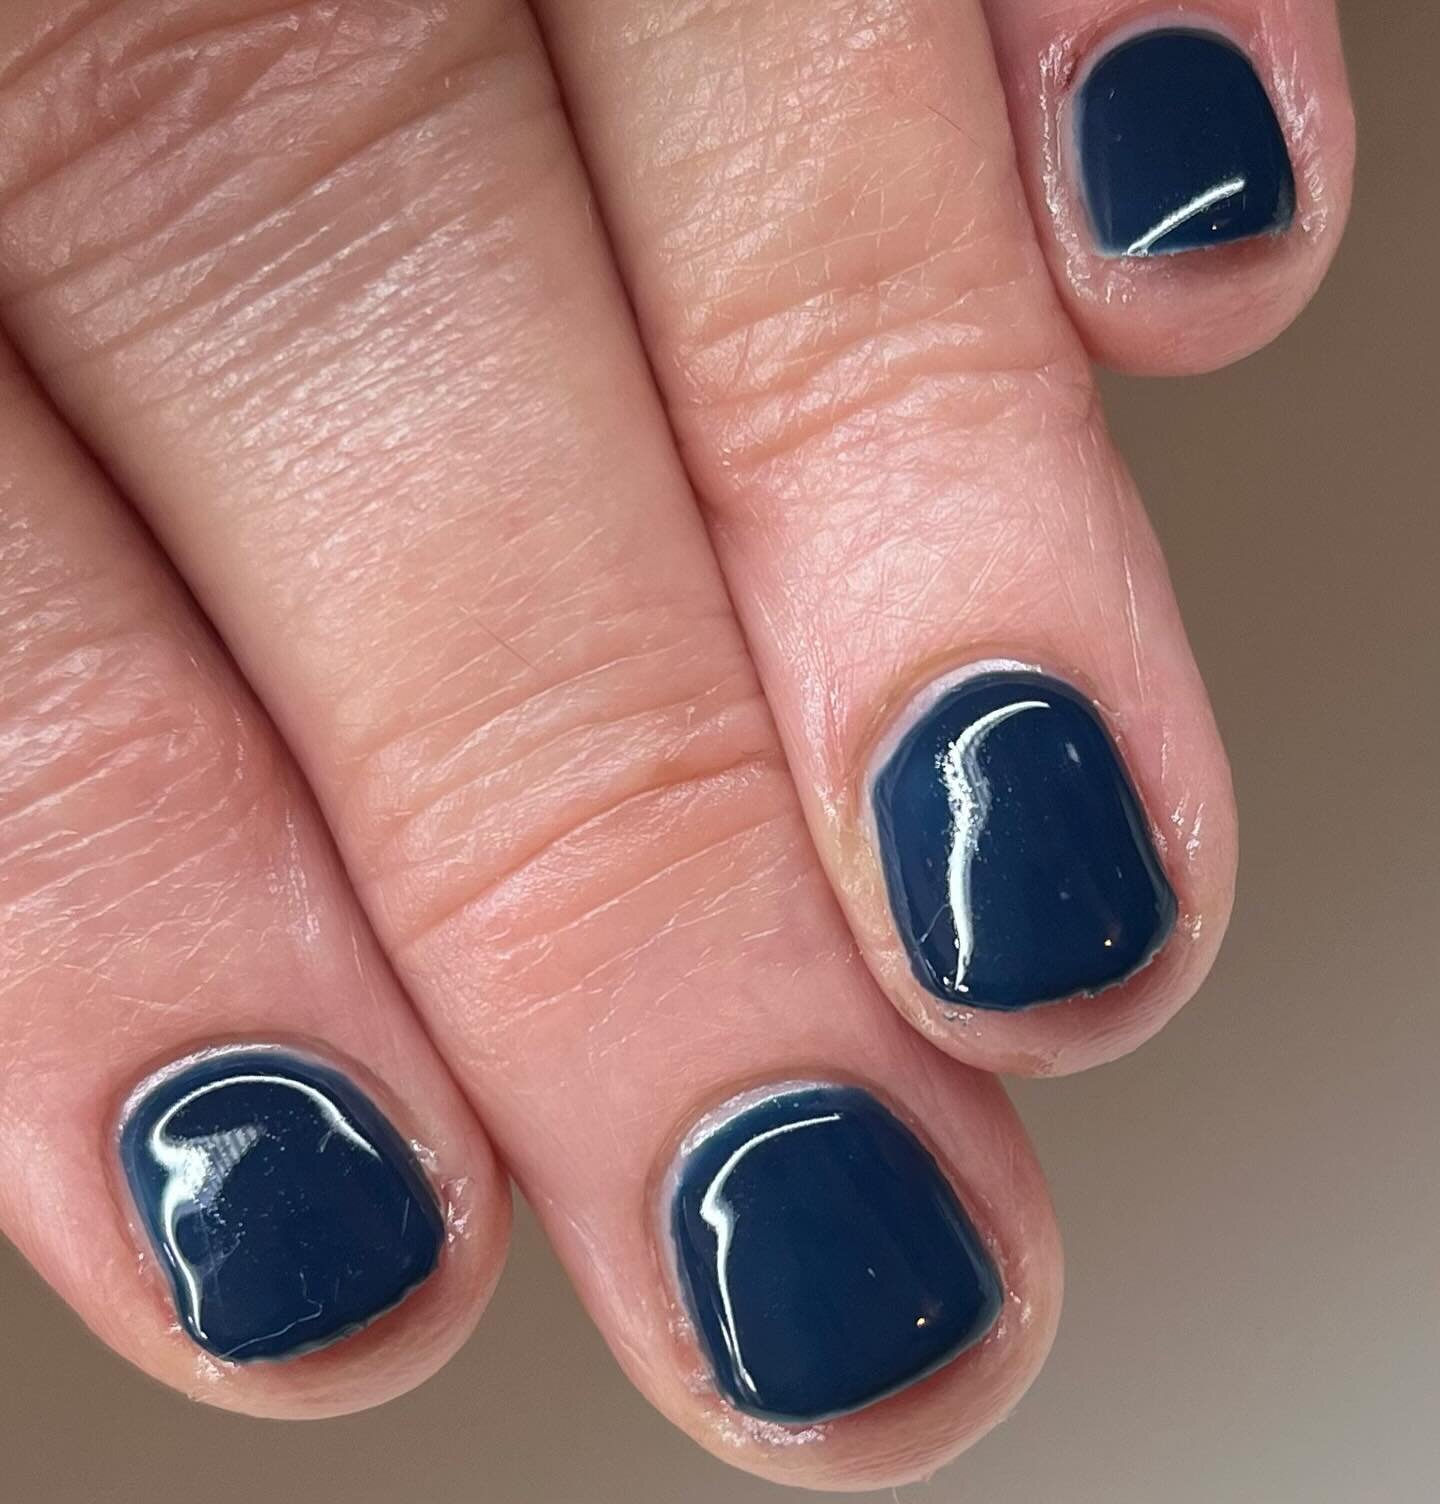 Short dark nails are so cute and this blue is Absoloutley gorgeous as well. 💙
#biosculpturenails #clevedonnails #newnails #gels #blue #clevedonnails